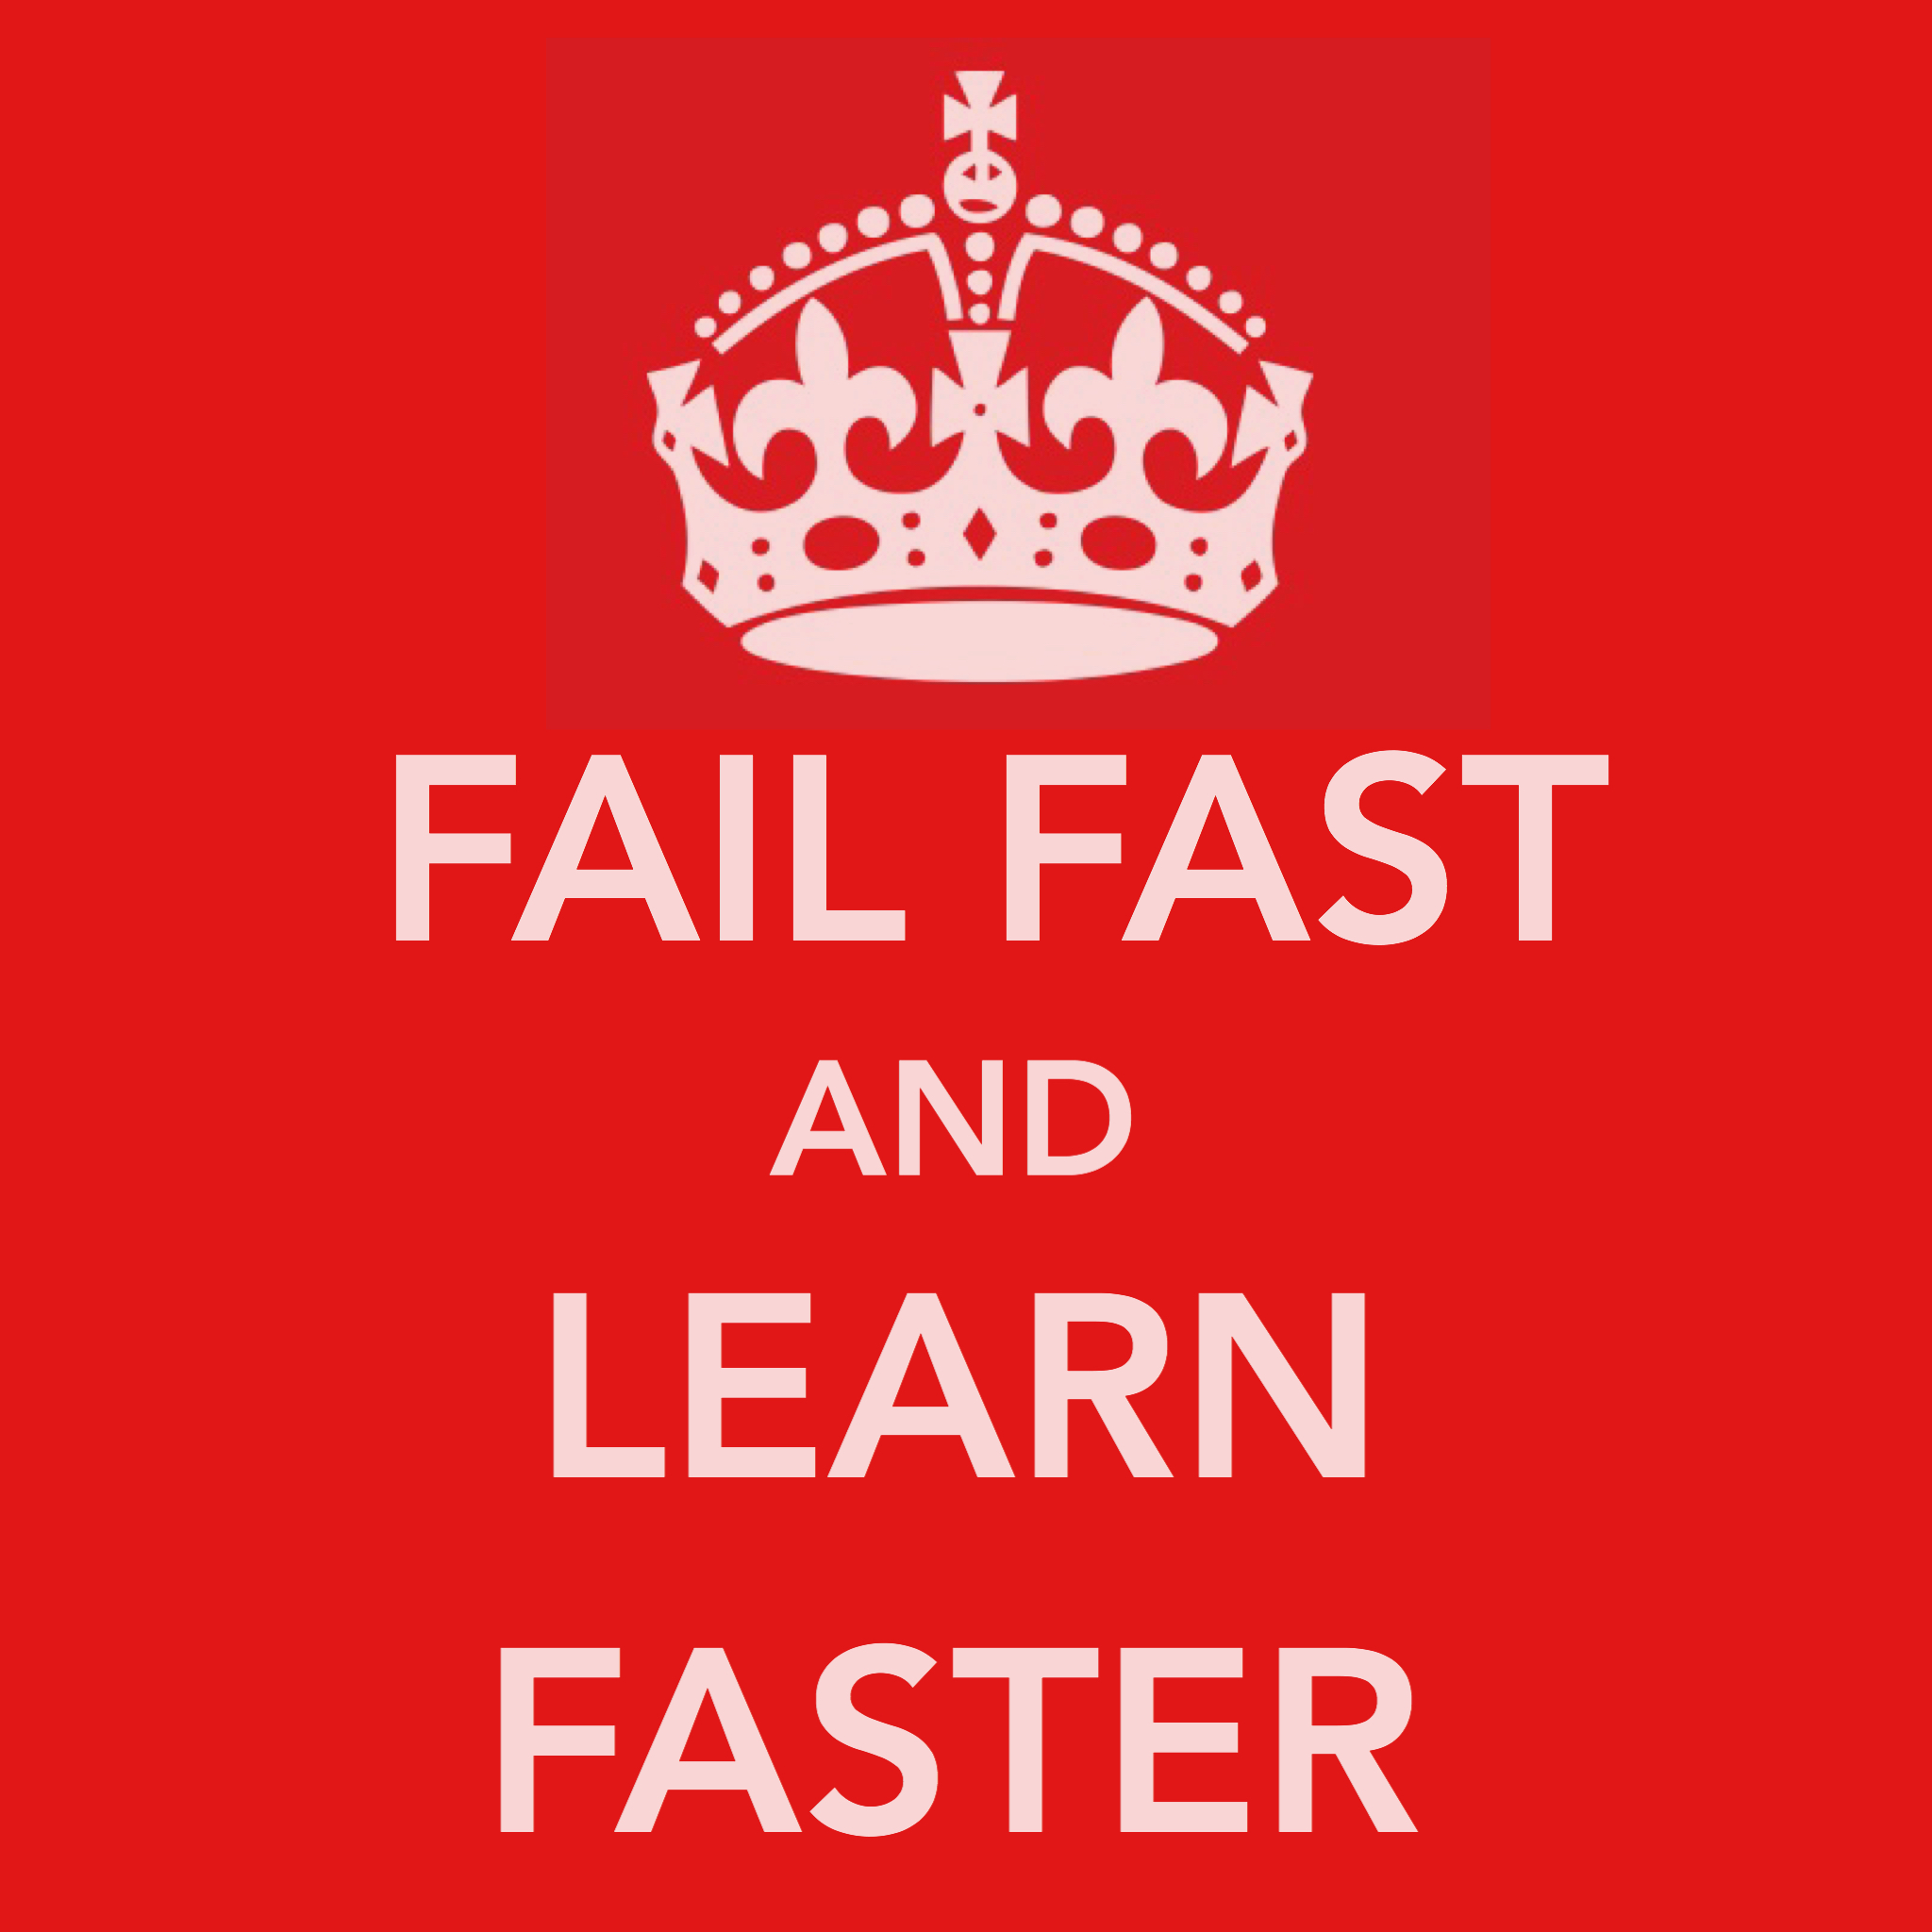 Learning to Fail Fast through Play, Playfulness & Improvisation ...